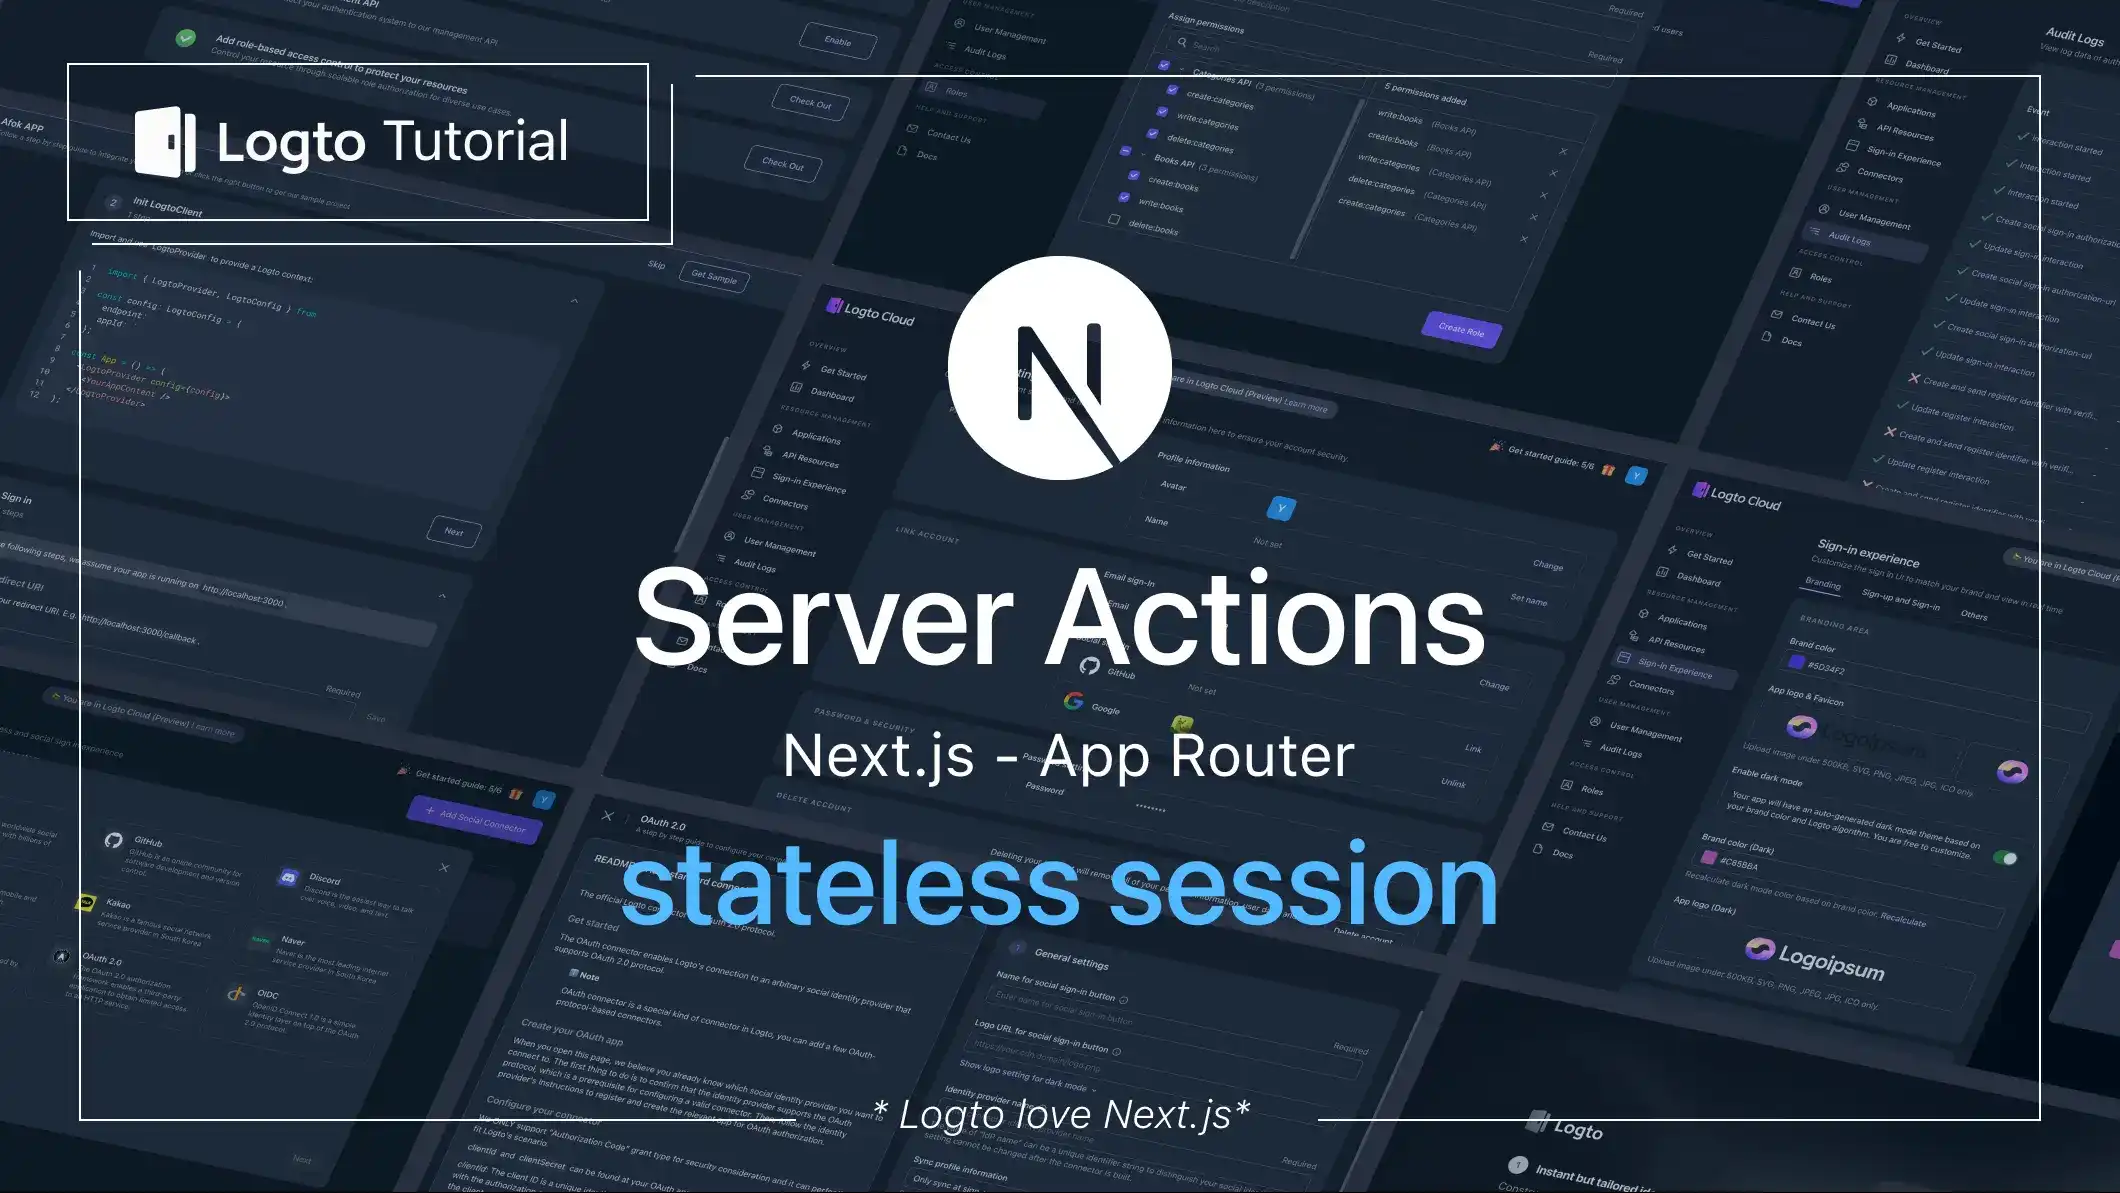 Implementing stateless session for Next.js using Server Actions